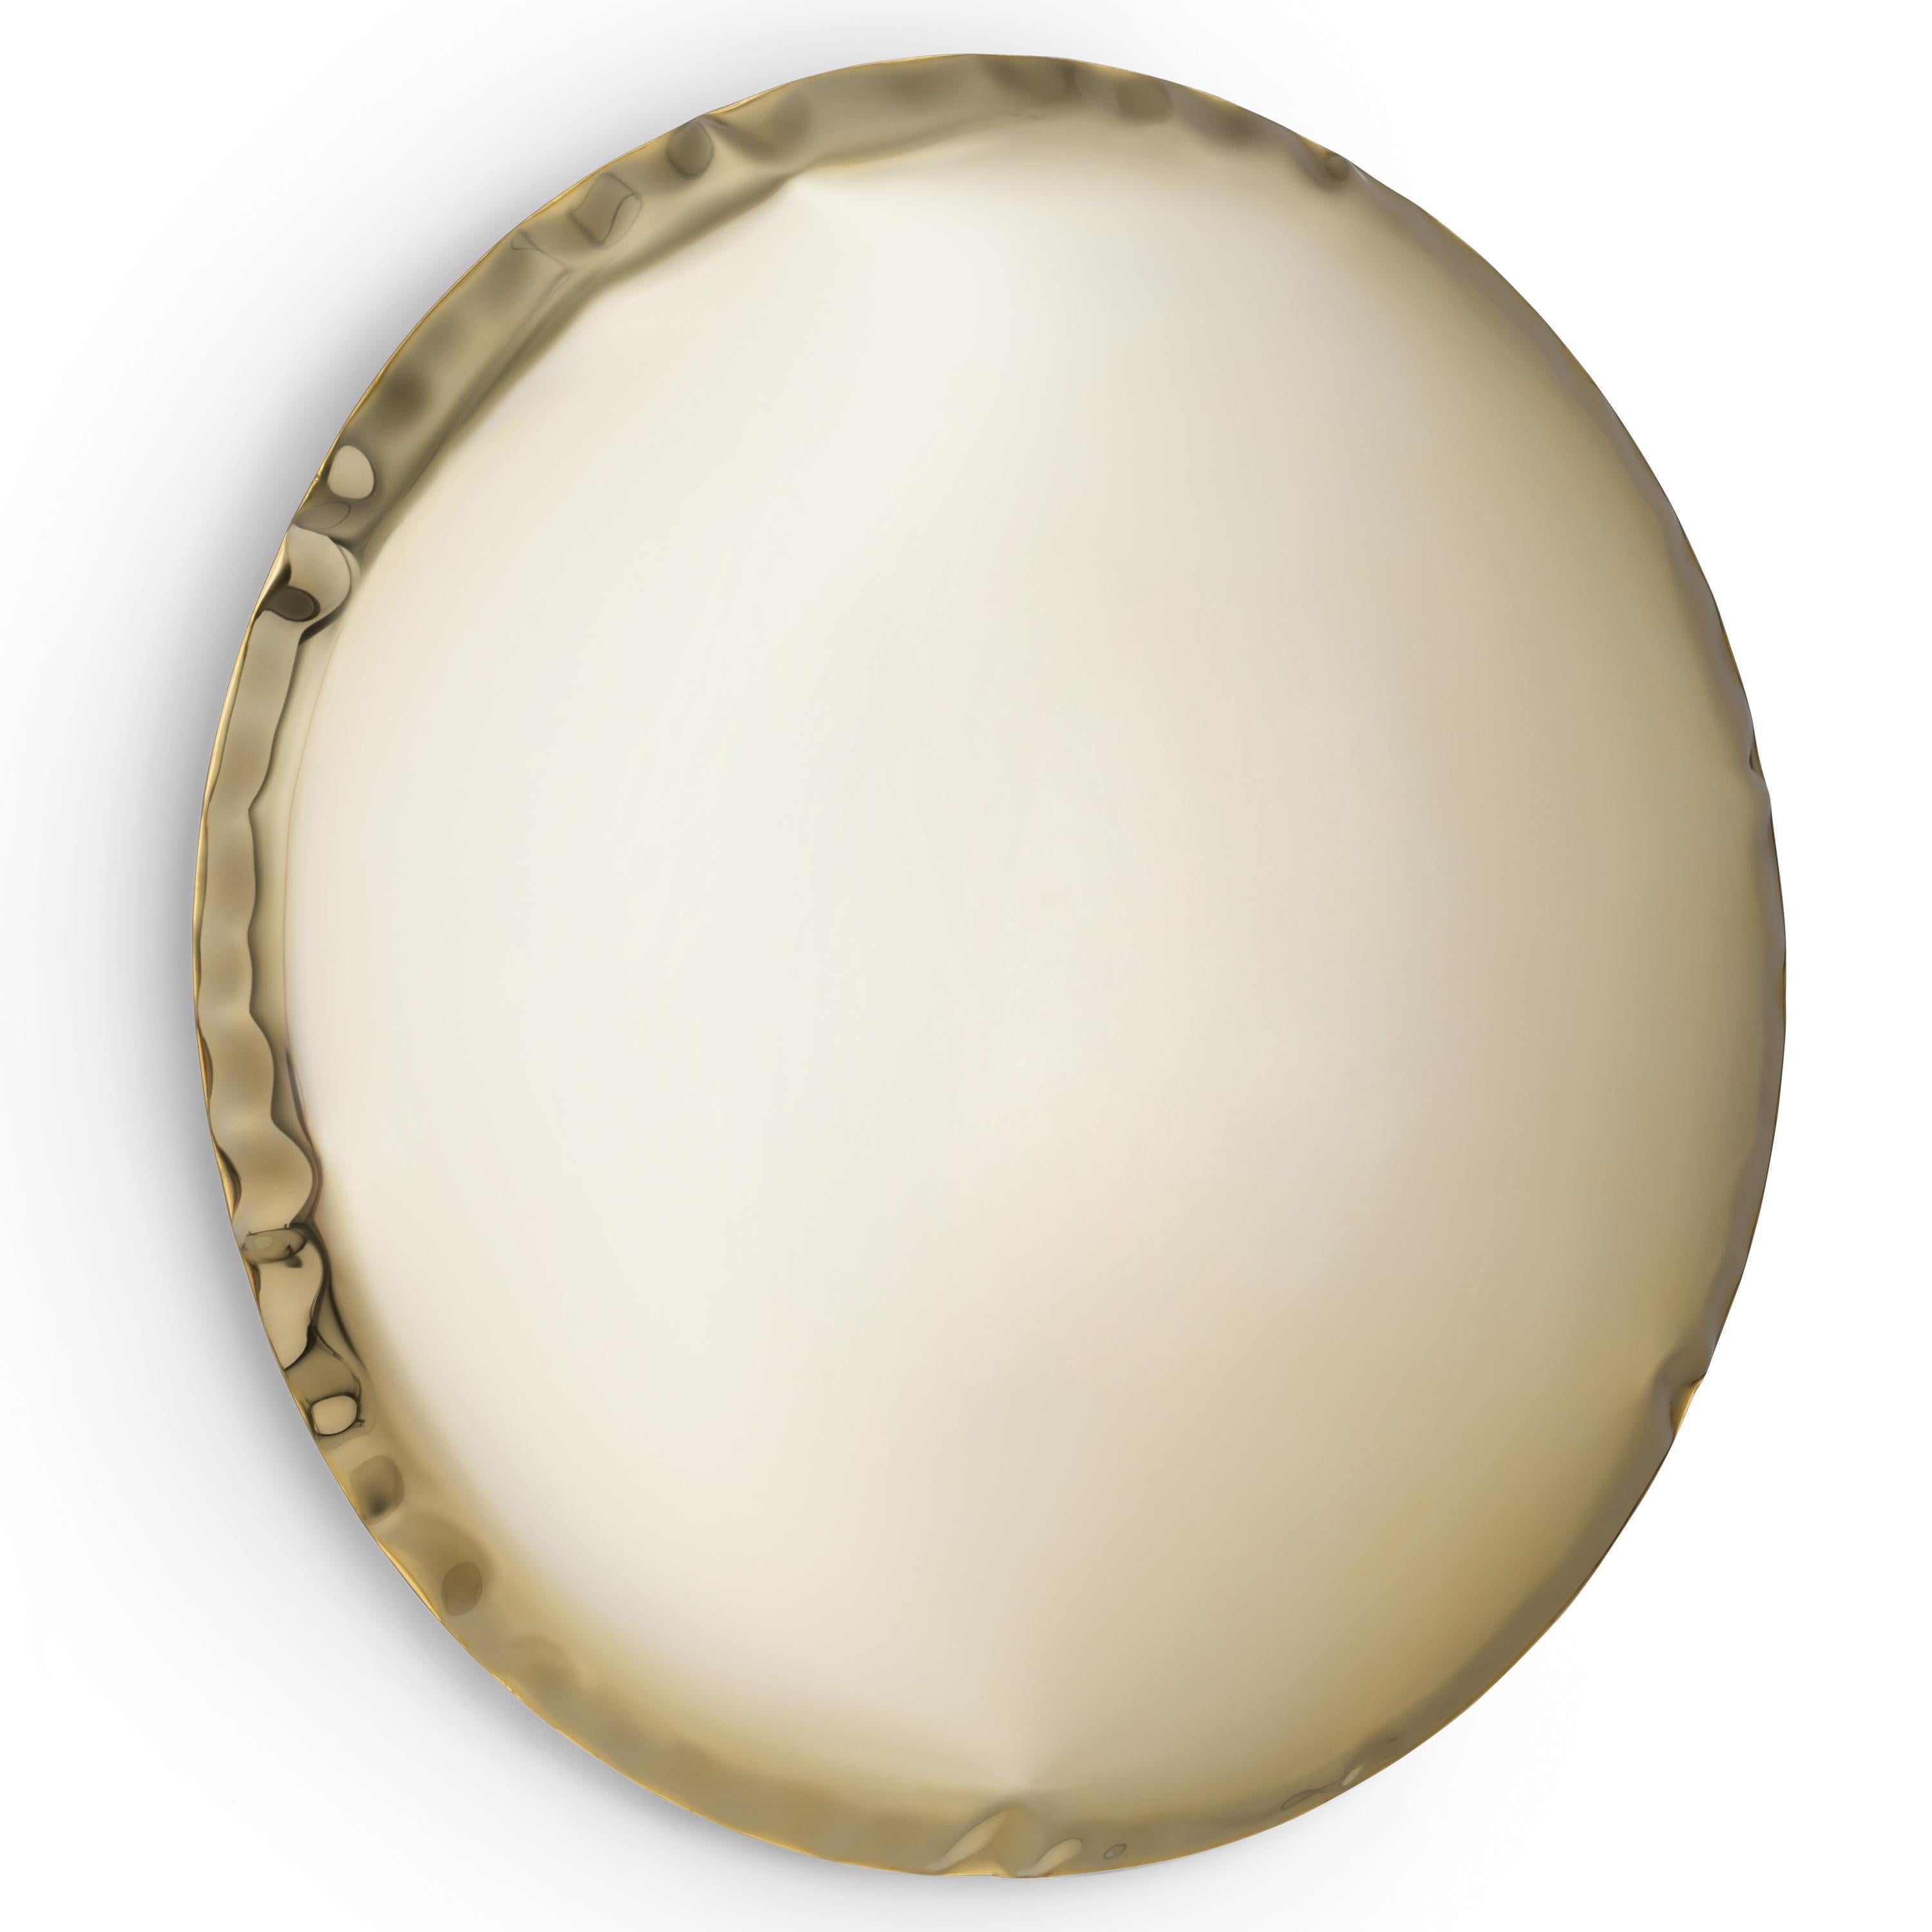 Contemporary Mirror 'OKO 95', Aurum Collection, Classic Gold, by Zieta For Sale 1